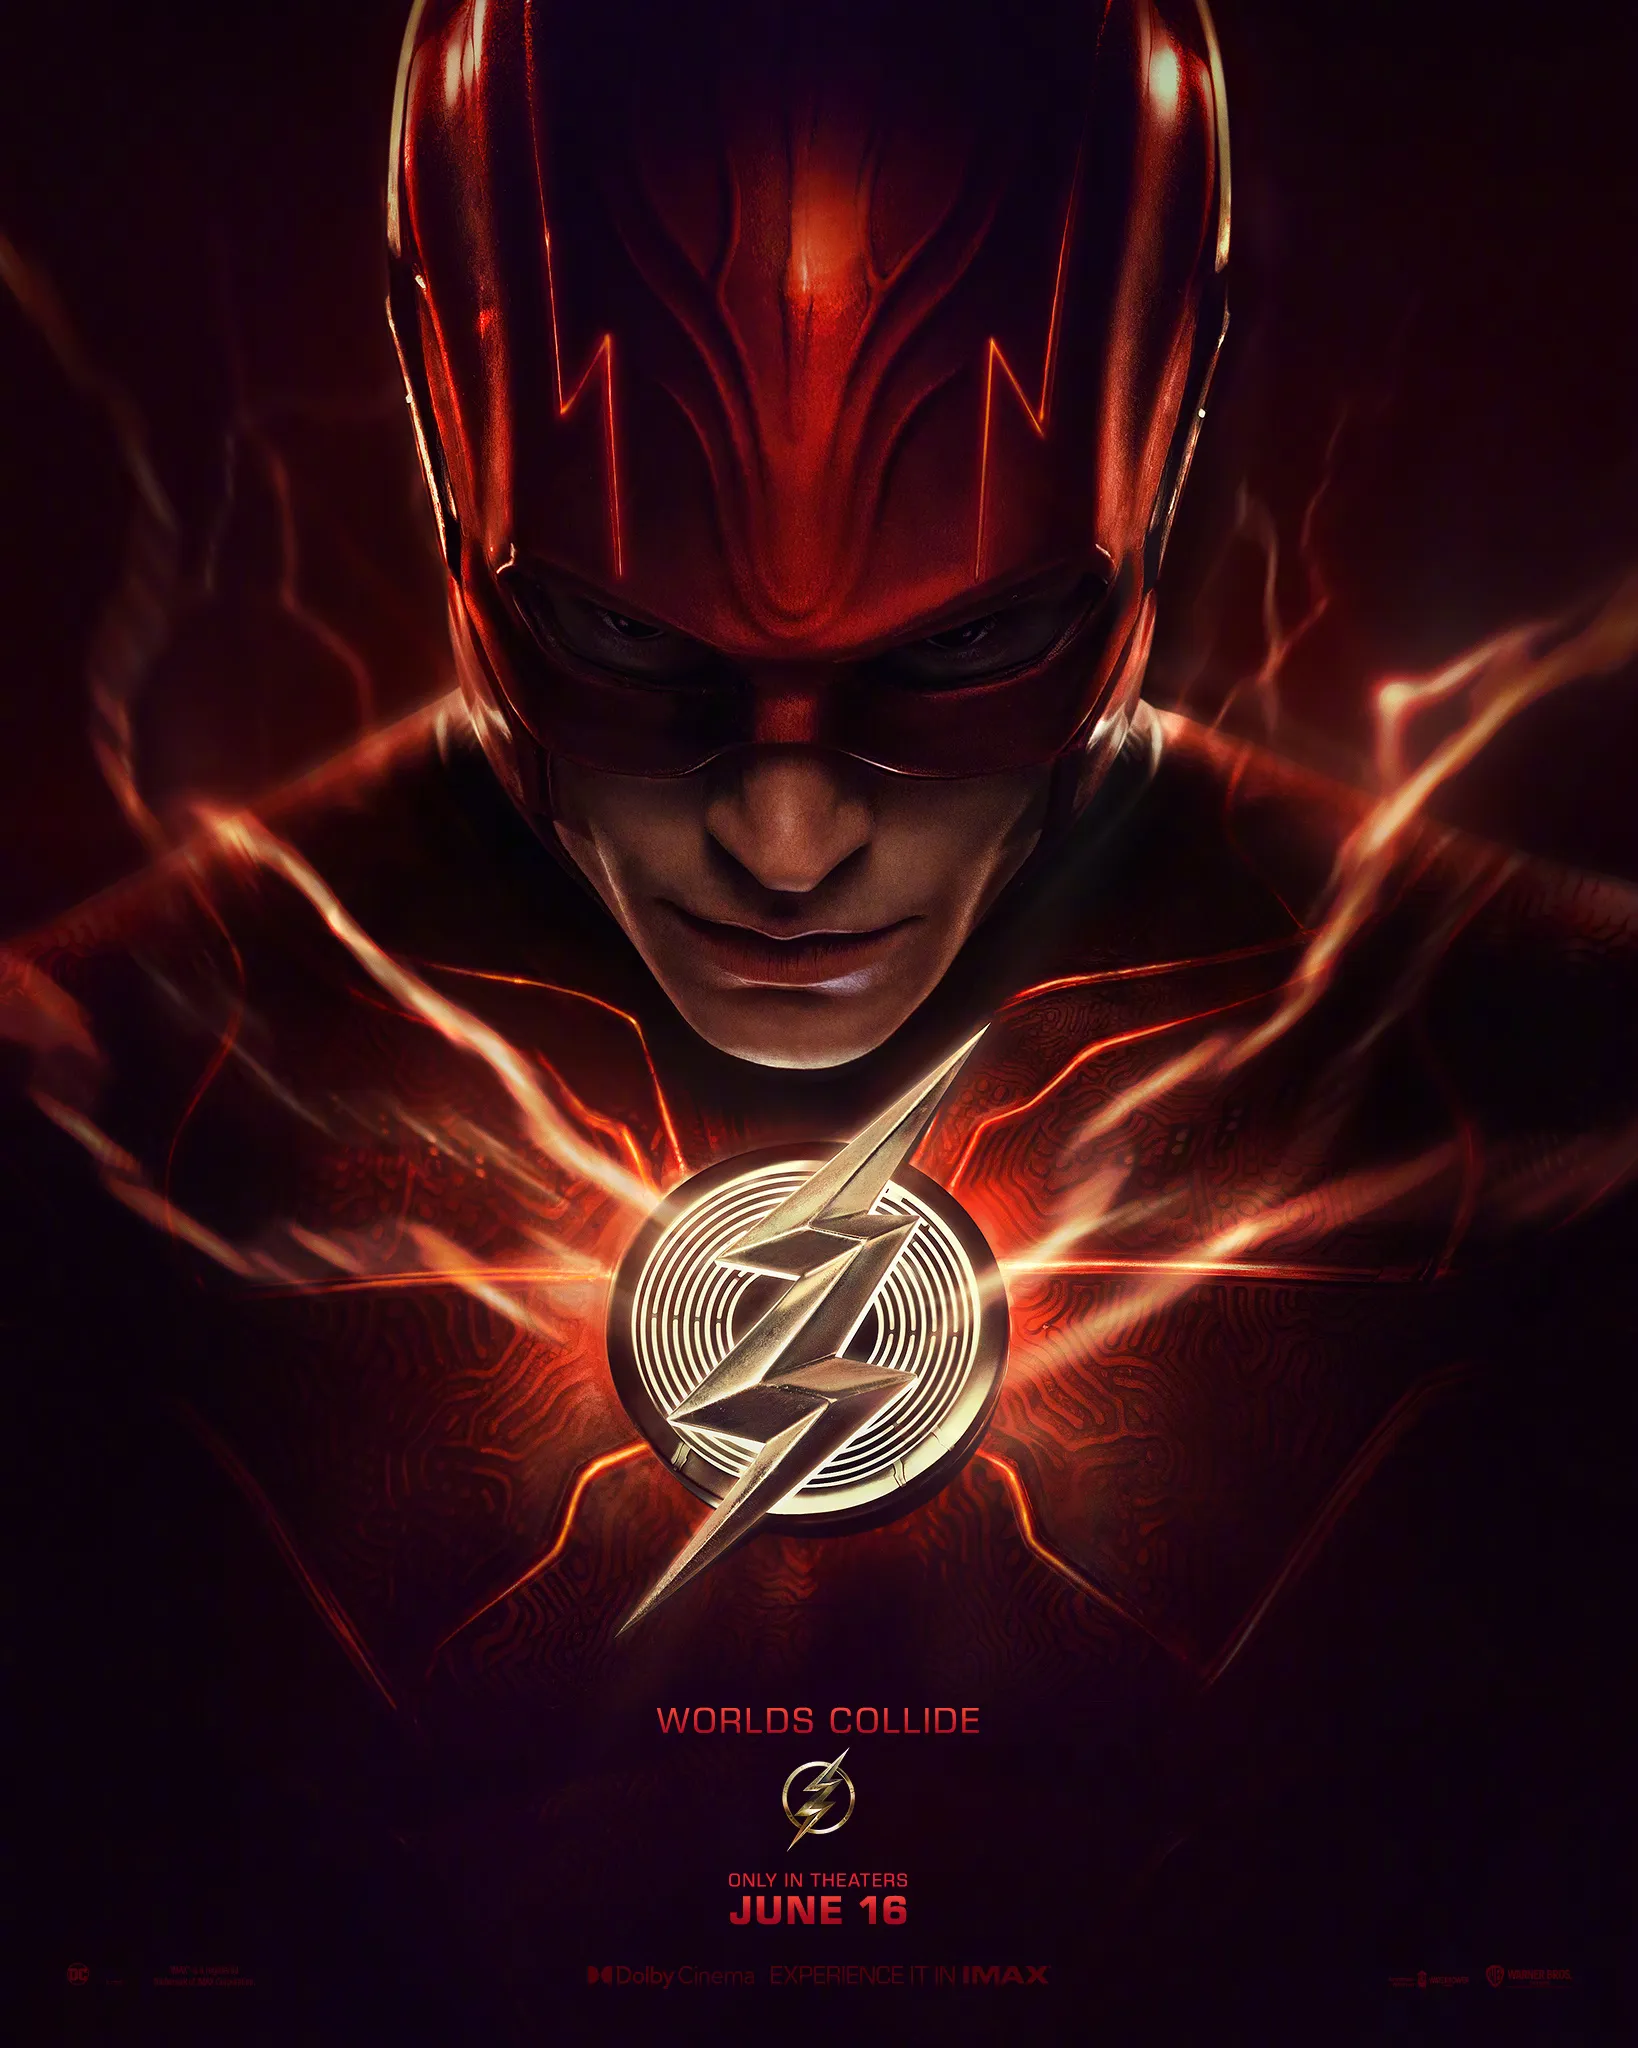 'The Flash' exposes a group of character posters: The Flash, Batman, Supergirl appear | FMV6